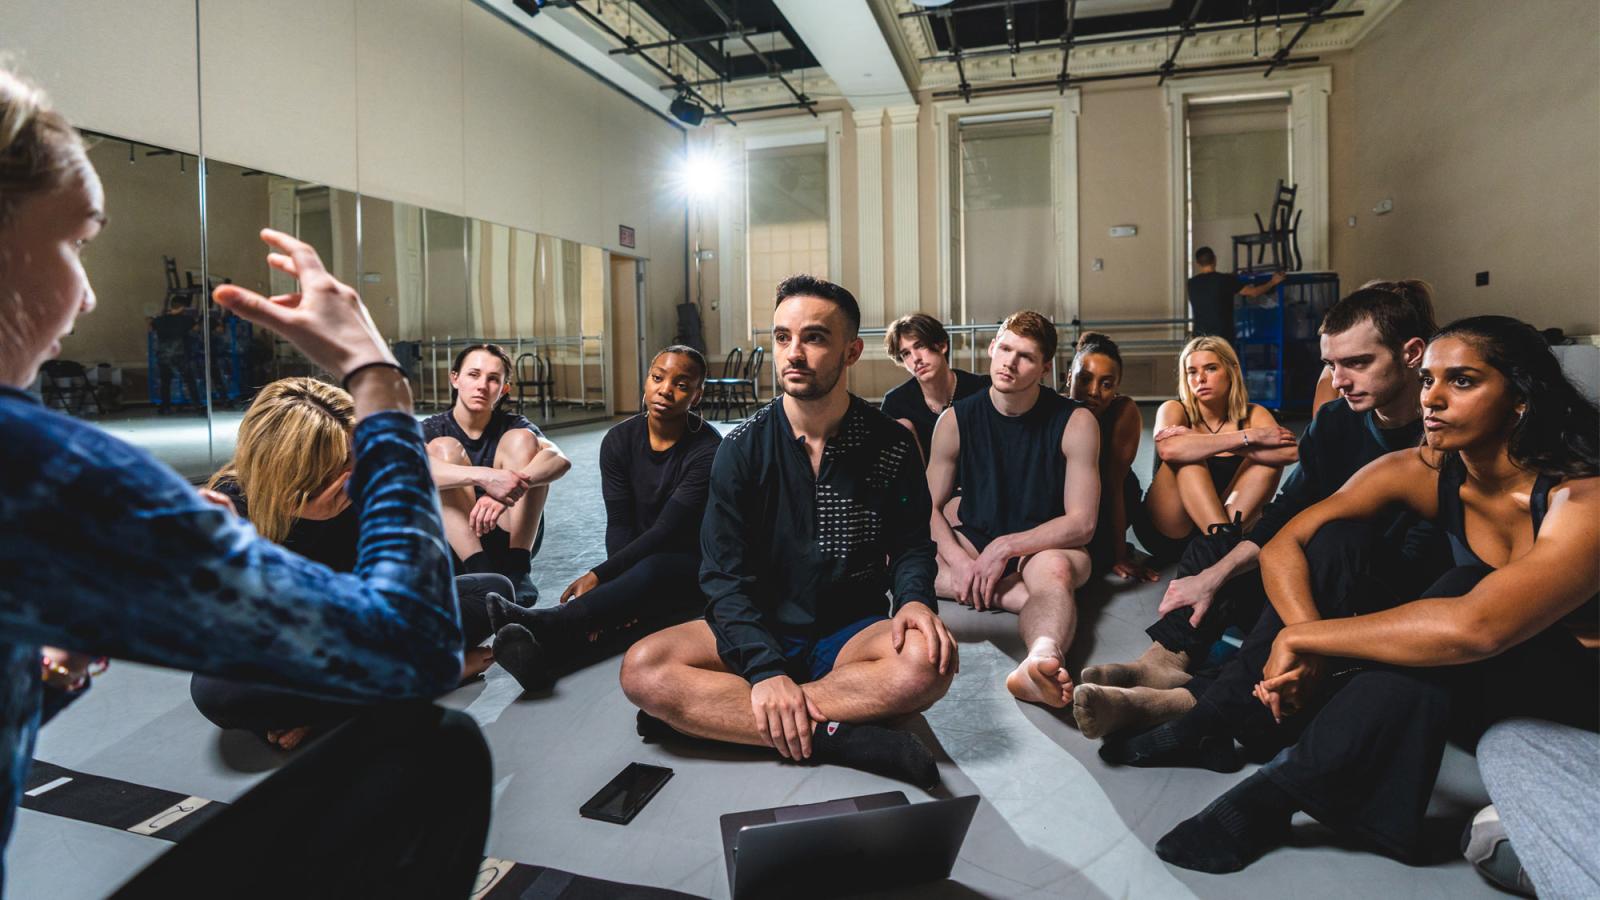 commercial dance students in a dance studio listening their instructor